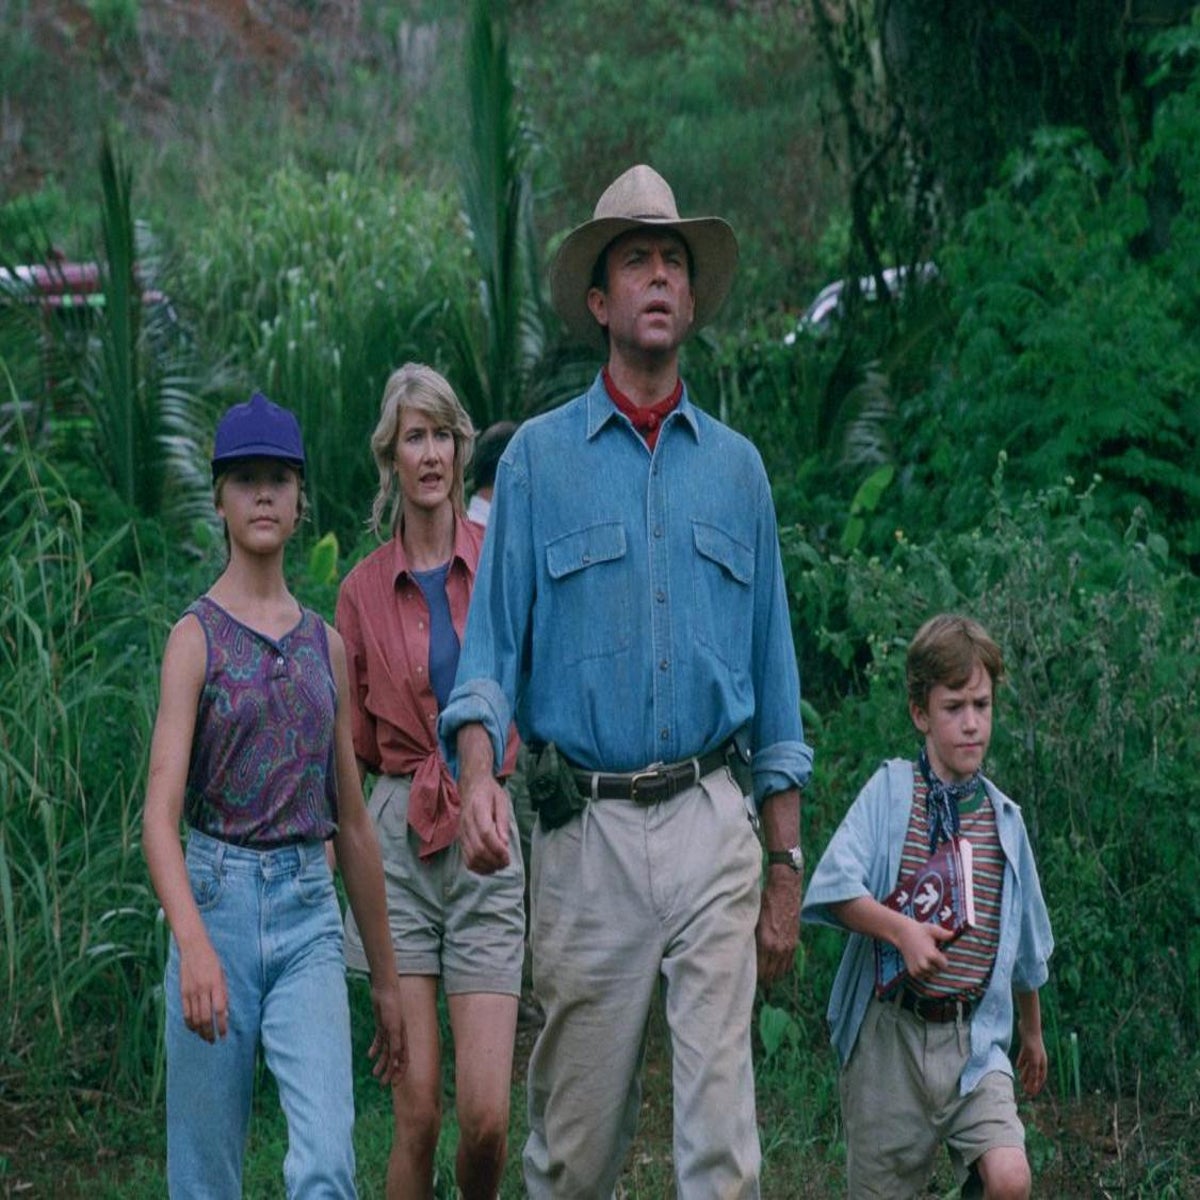 https://static.independent.co.uk/s3fs-public/thumbnails/image/2020/08/13/08/jurassic-park-0.jpg?width=1200&height=1200&fit=crop